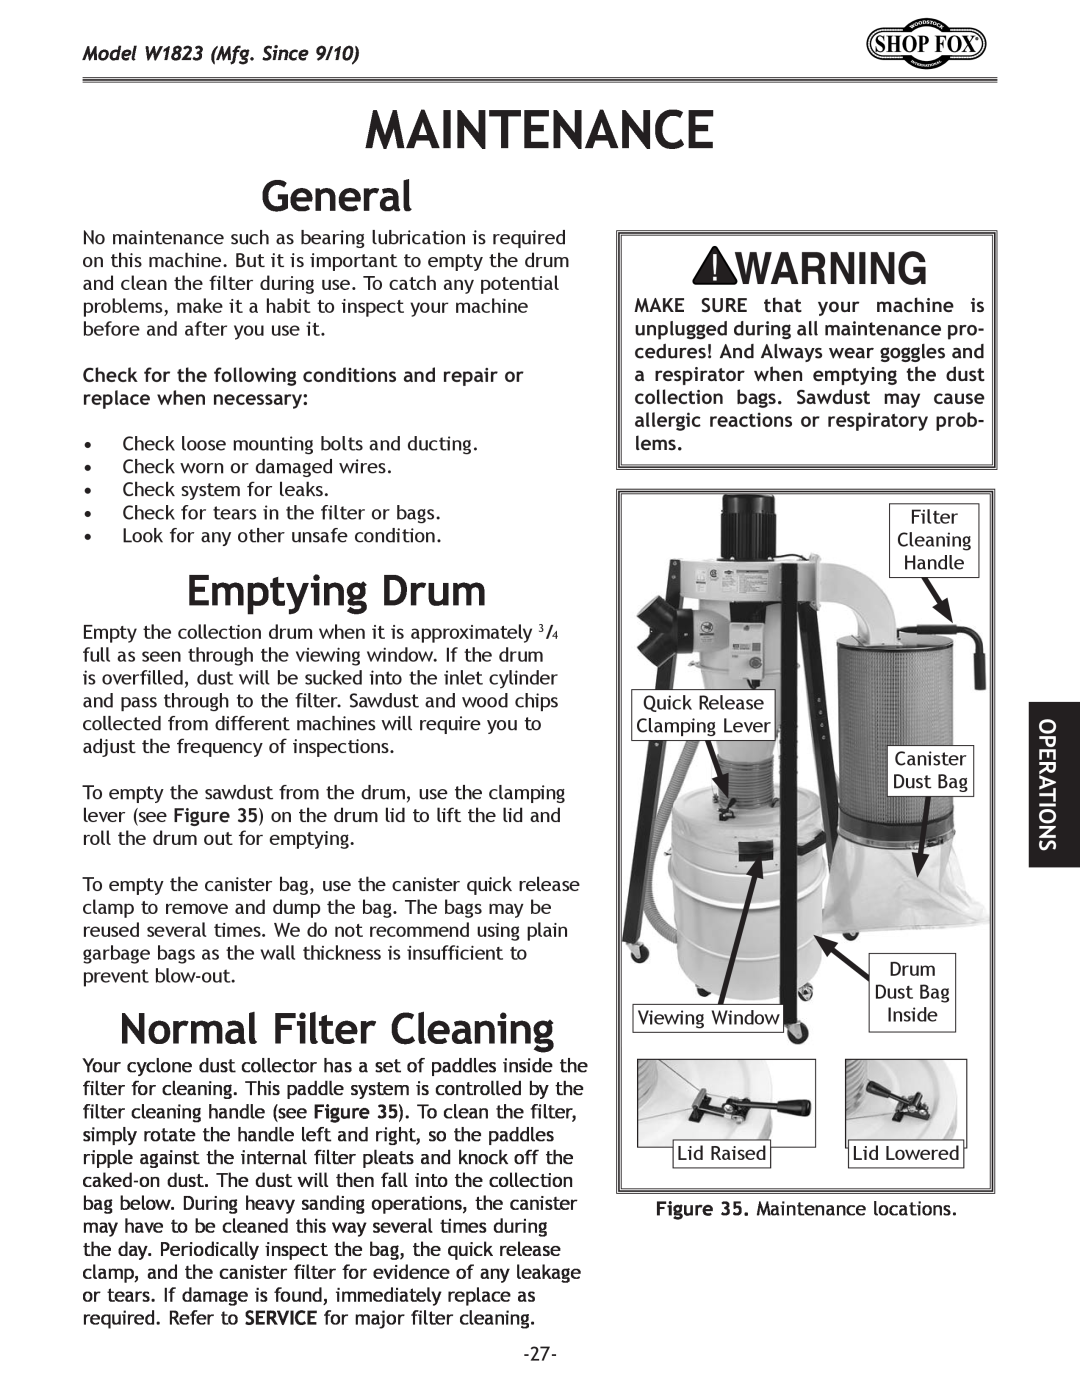 Woodstock manual Maintenance, General, Emptying Drum, Normal Filter Cleaning, Model W1823 Mfg. Since 9/10, Operations 